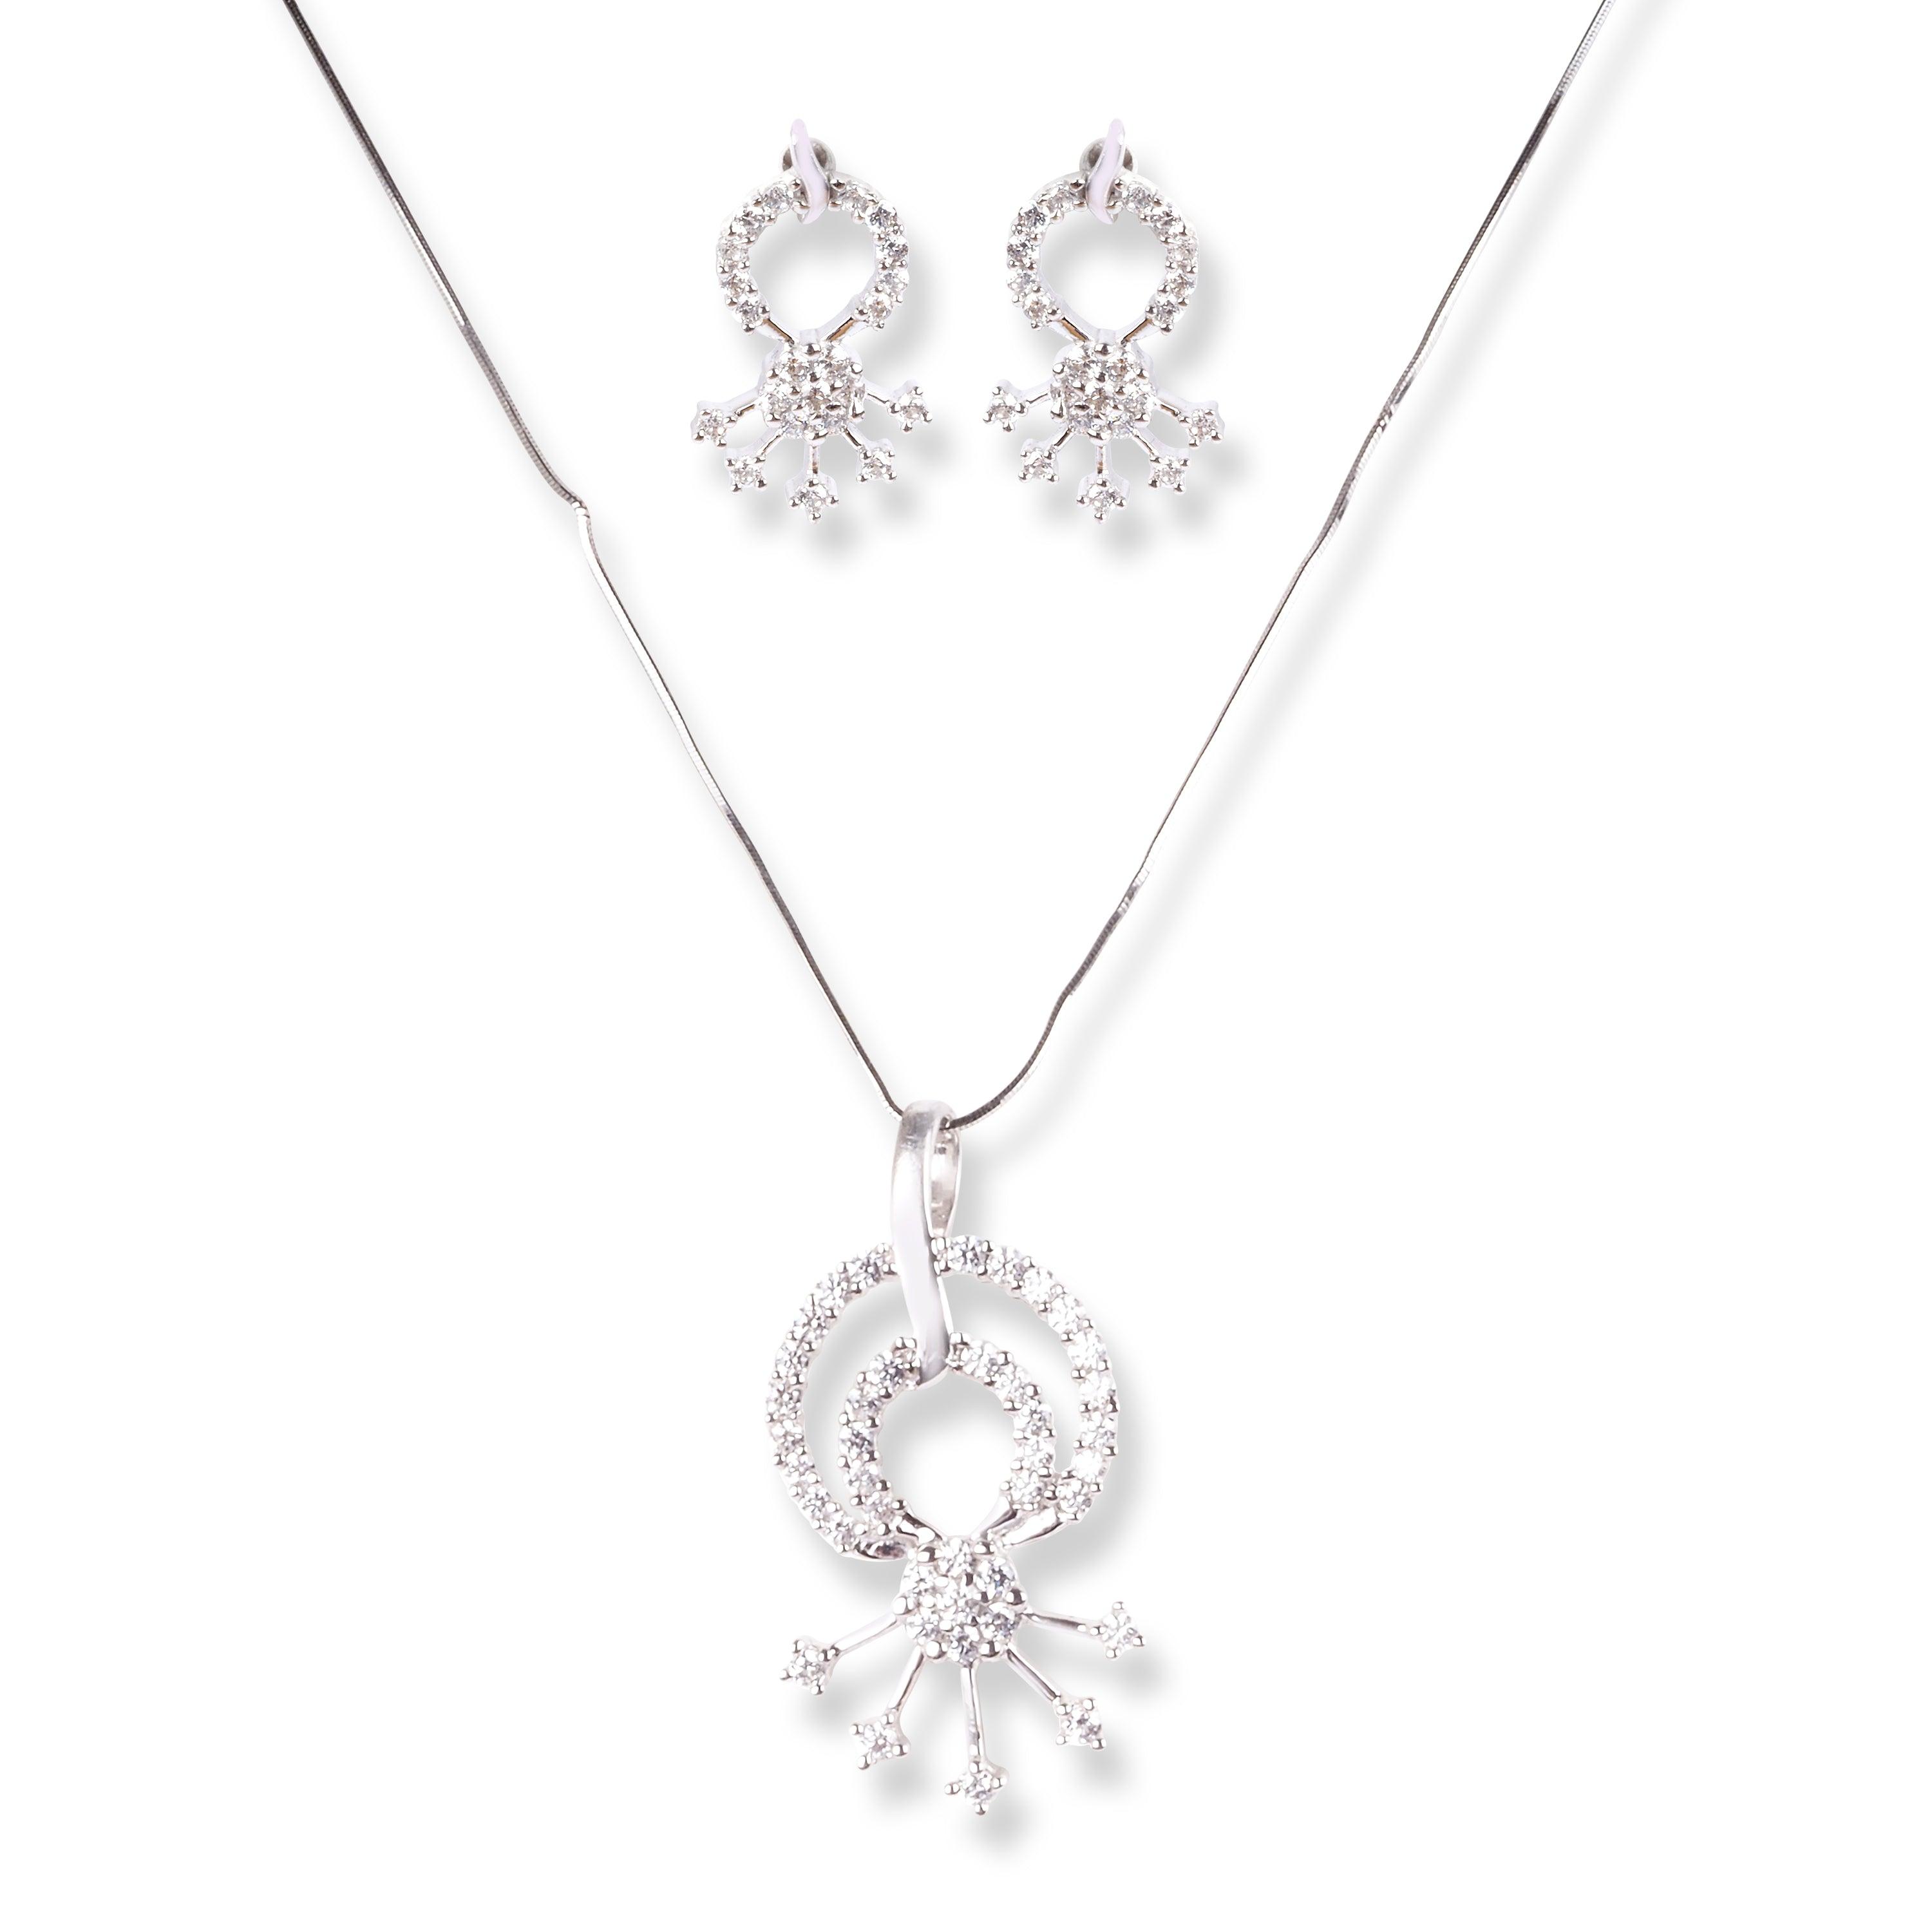 18ct White Gold Set with Cubic Zirconia Stones PS8061 - Minar Jewellers